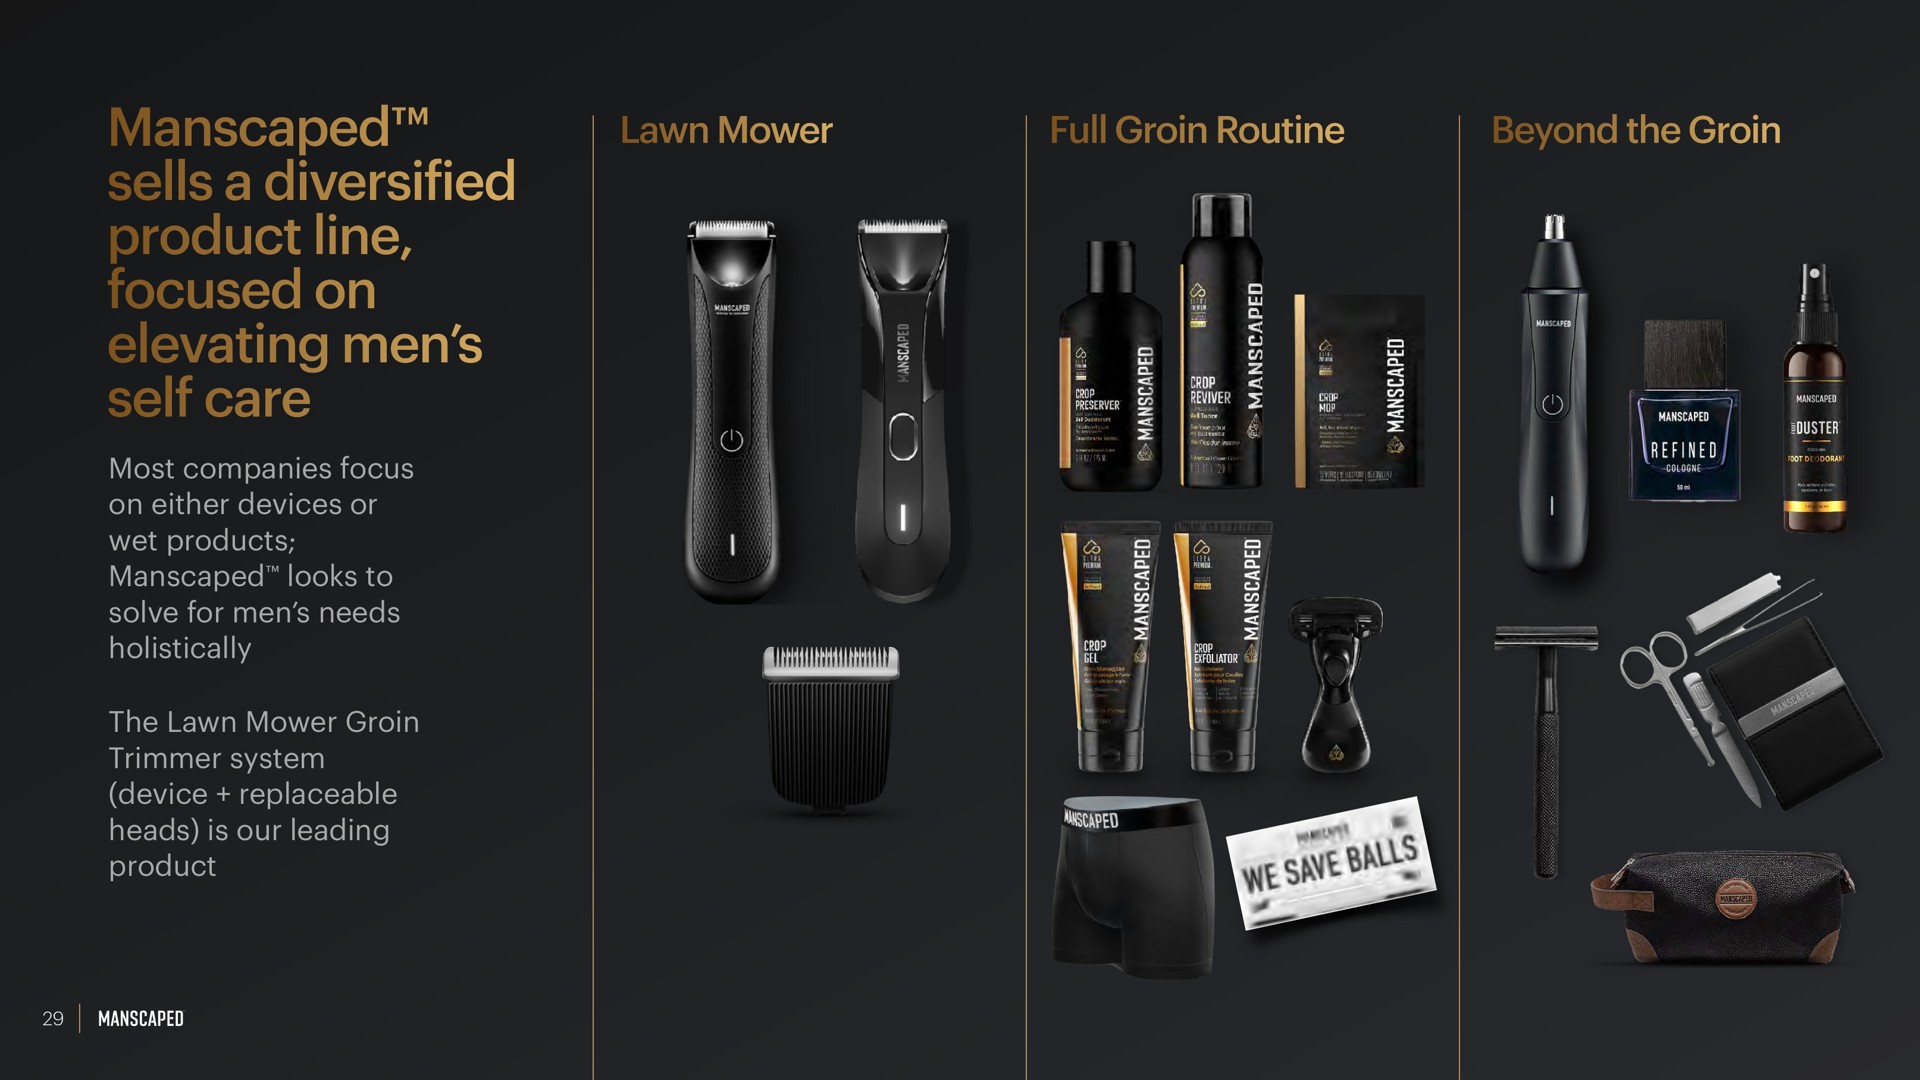 lawn mower full groin routine beyond the groin sells a diversified product line focused on elevating men self care is i | Manscaped